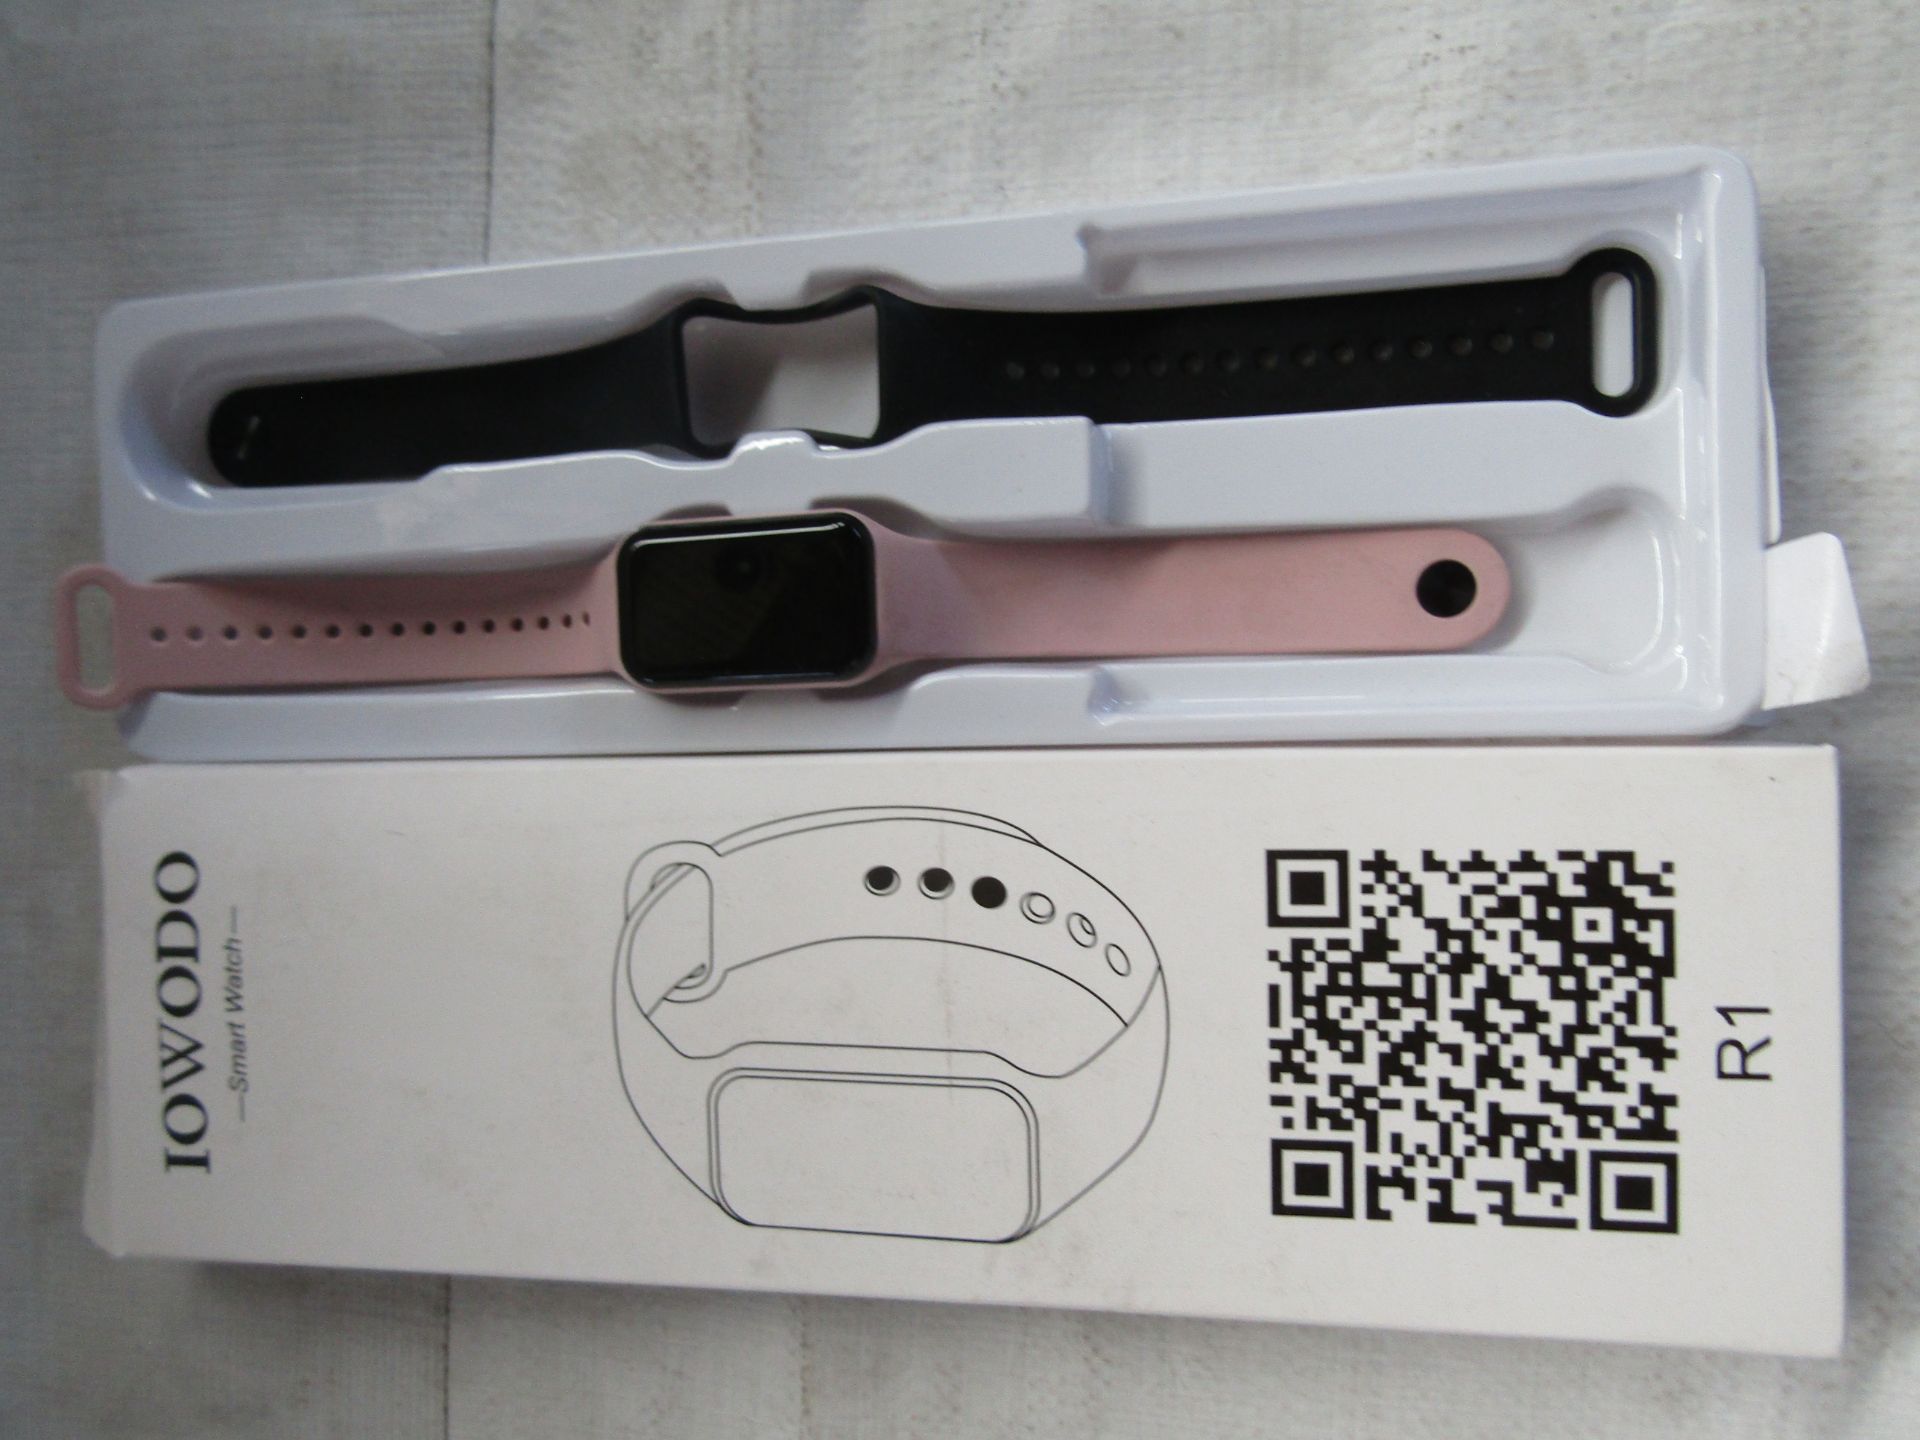 Iowodo Smart Watch, Unchecked & Boxed.